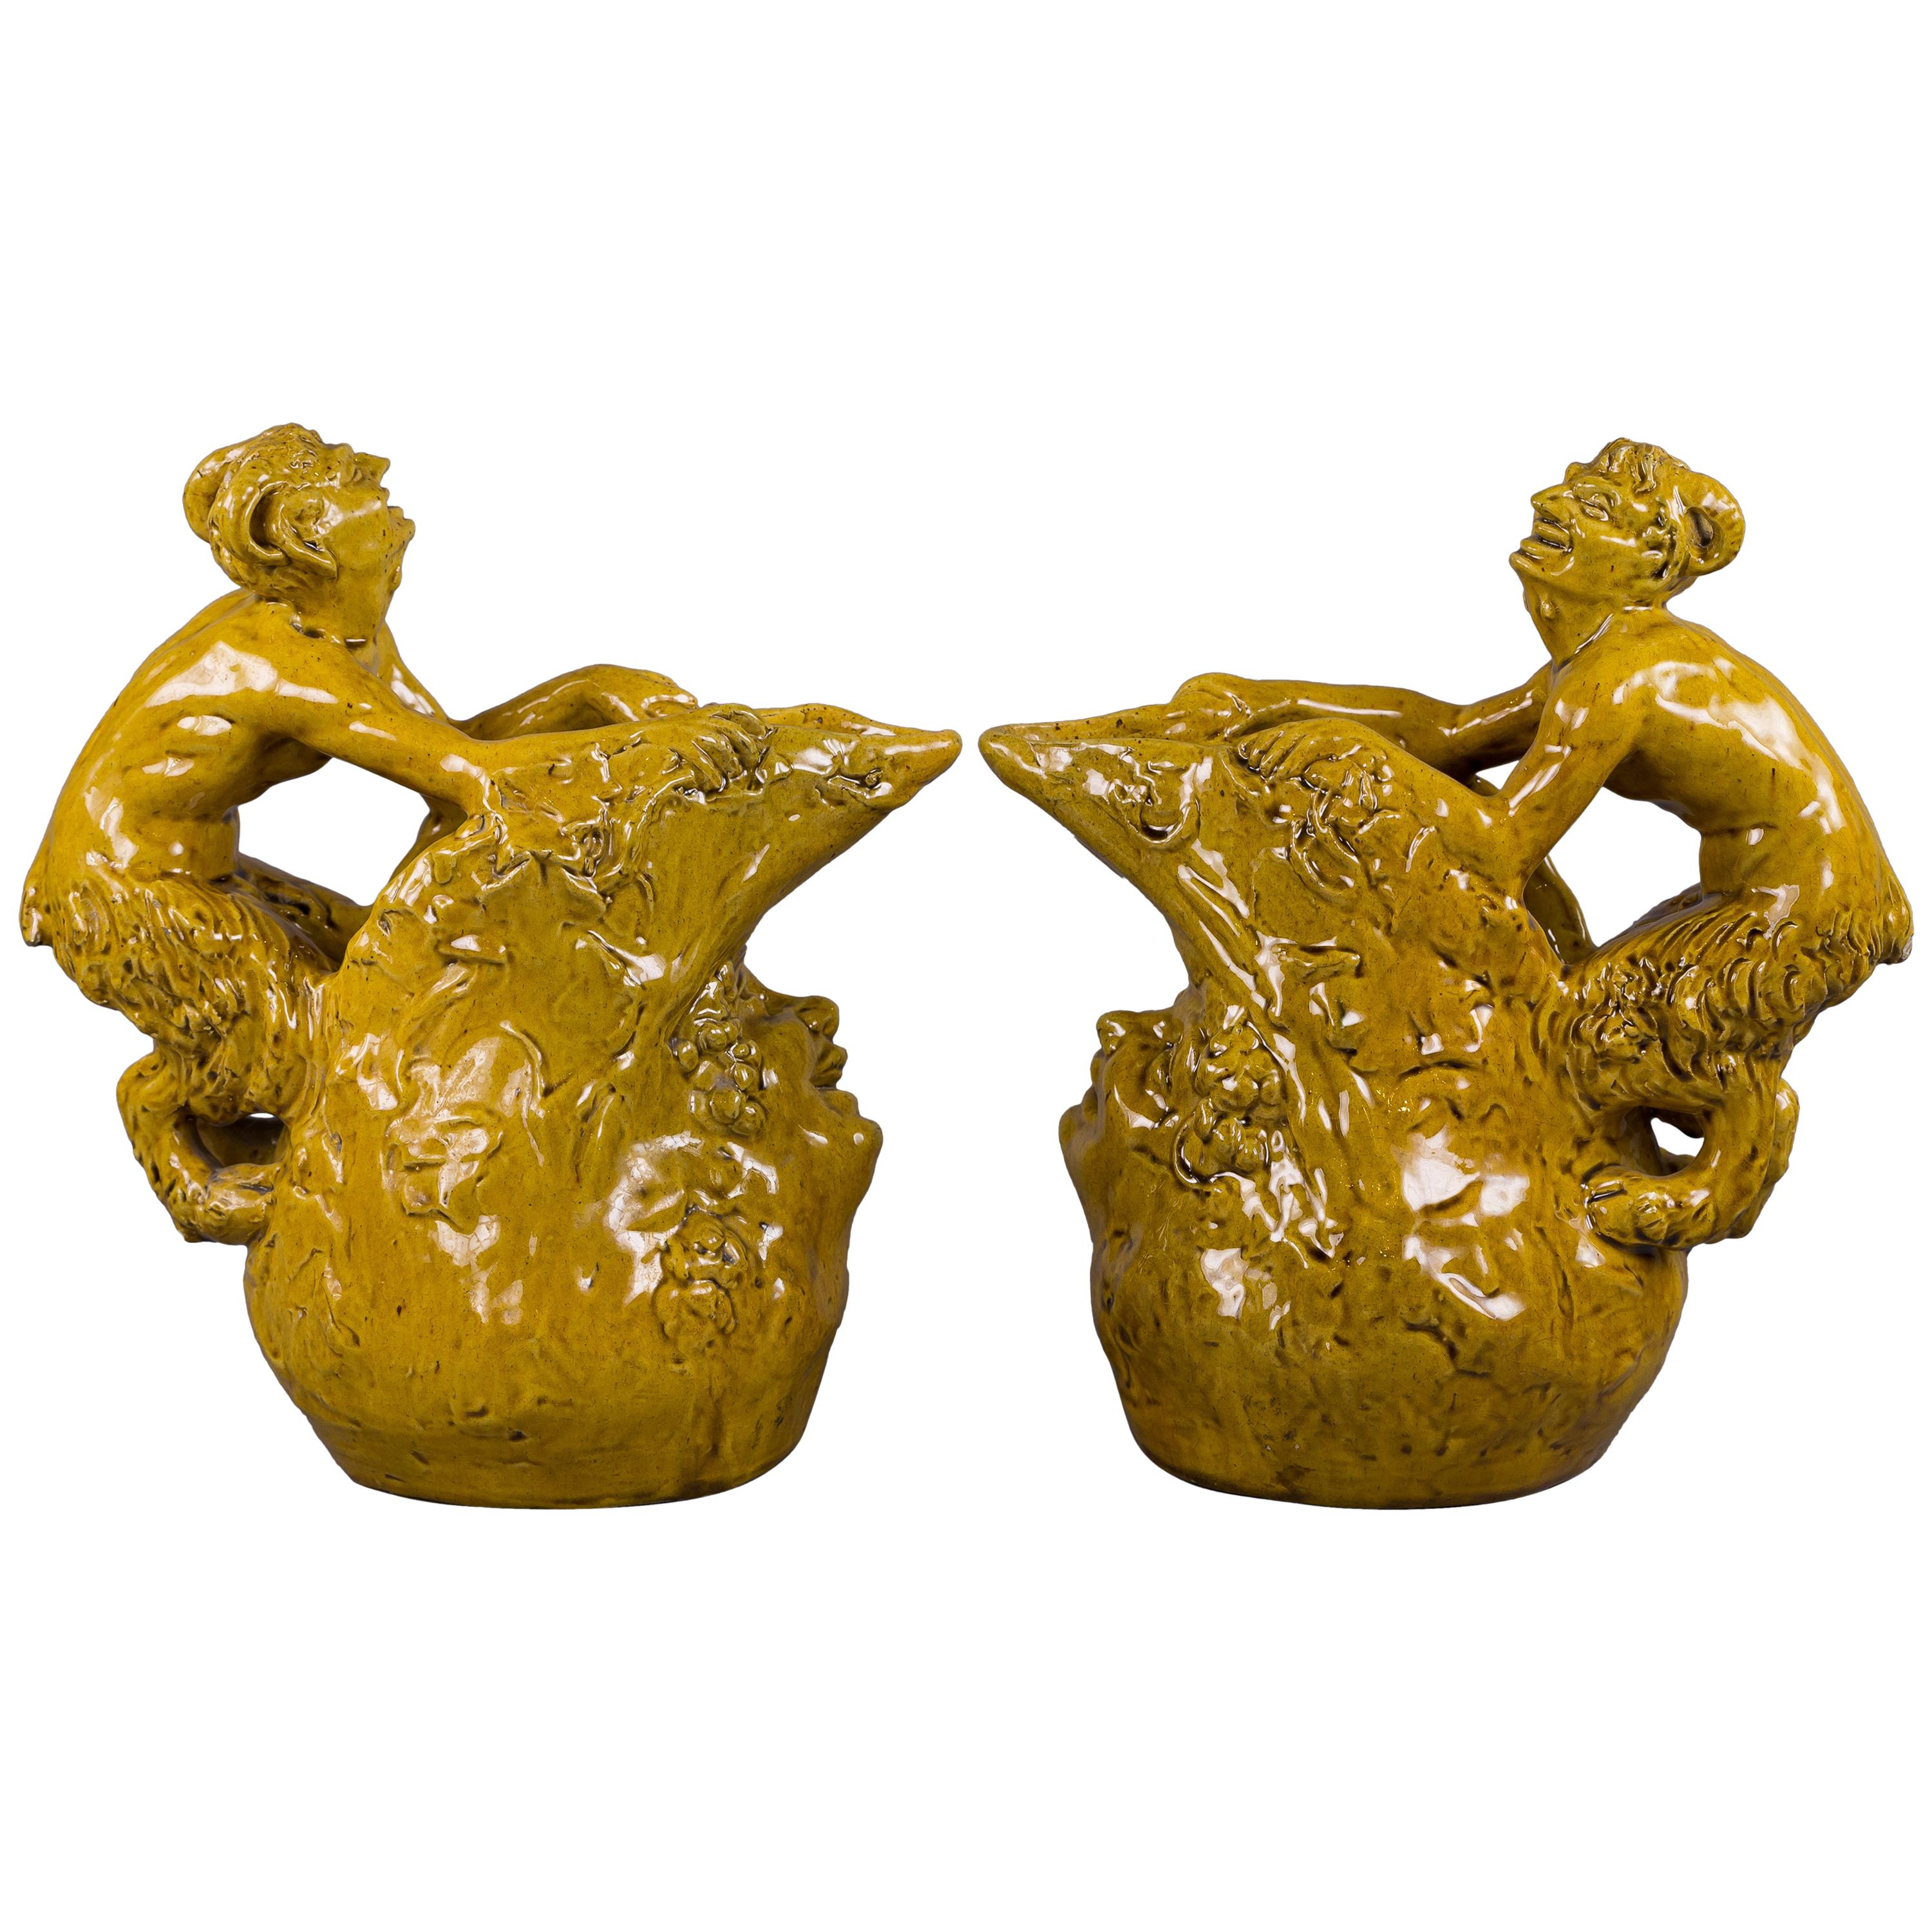 Pair of Continental Yellow Glazed Figural Jugs, circa 1870 For Sale